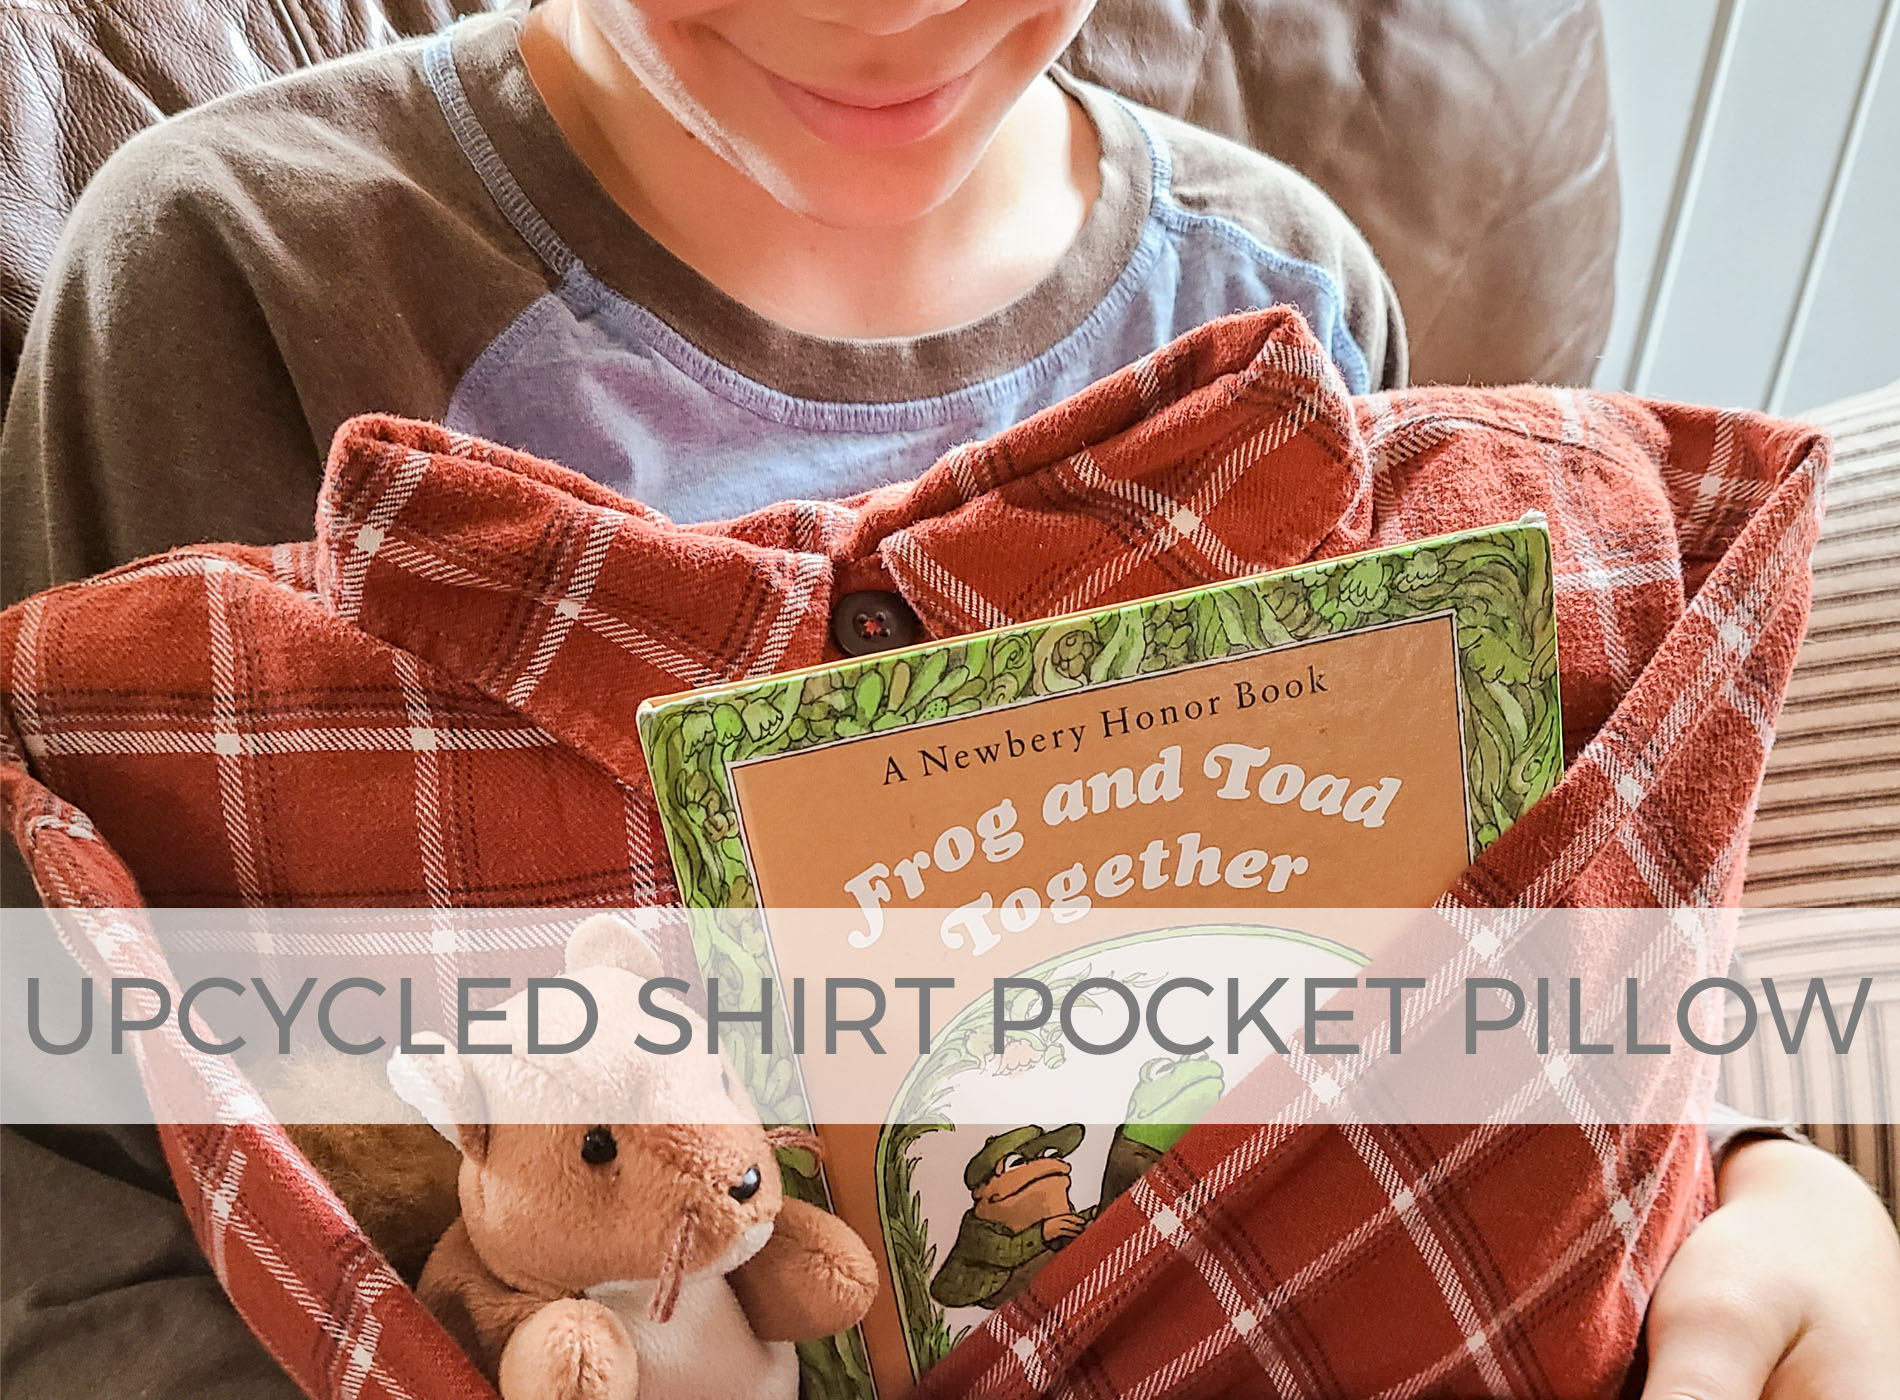 Upcycled Shirt Pocket Pillow for Gifts ~ Tutorial by Larissa of Prodigal Pieces | prodigalpieces.com #prodigalpieces